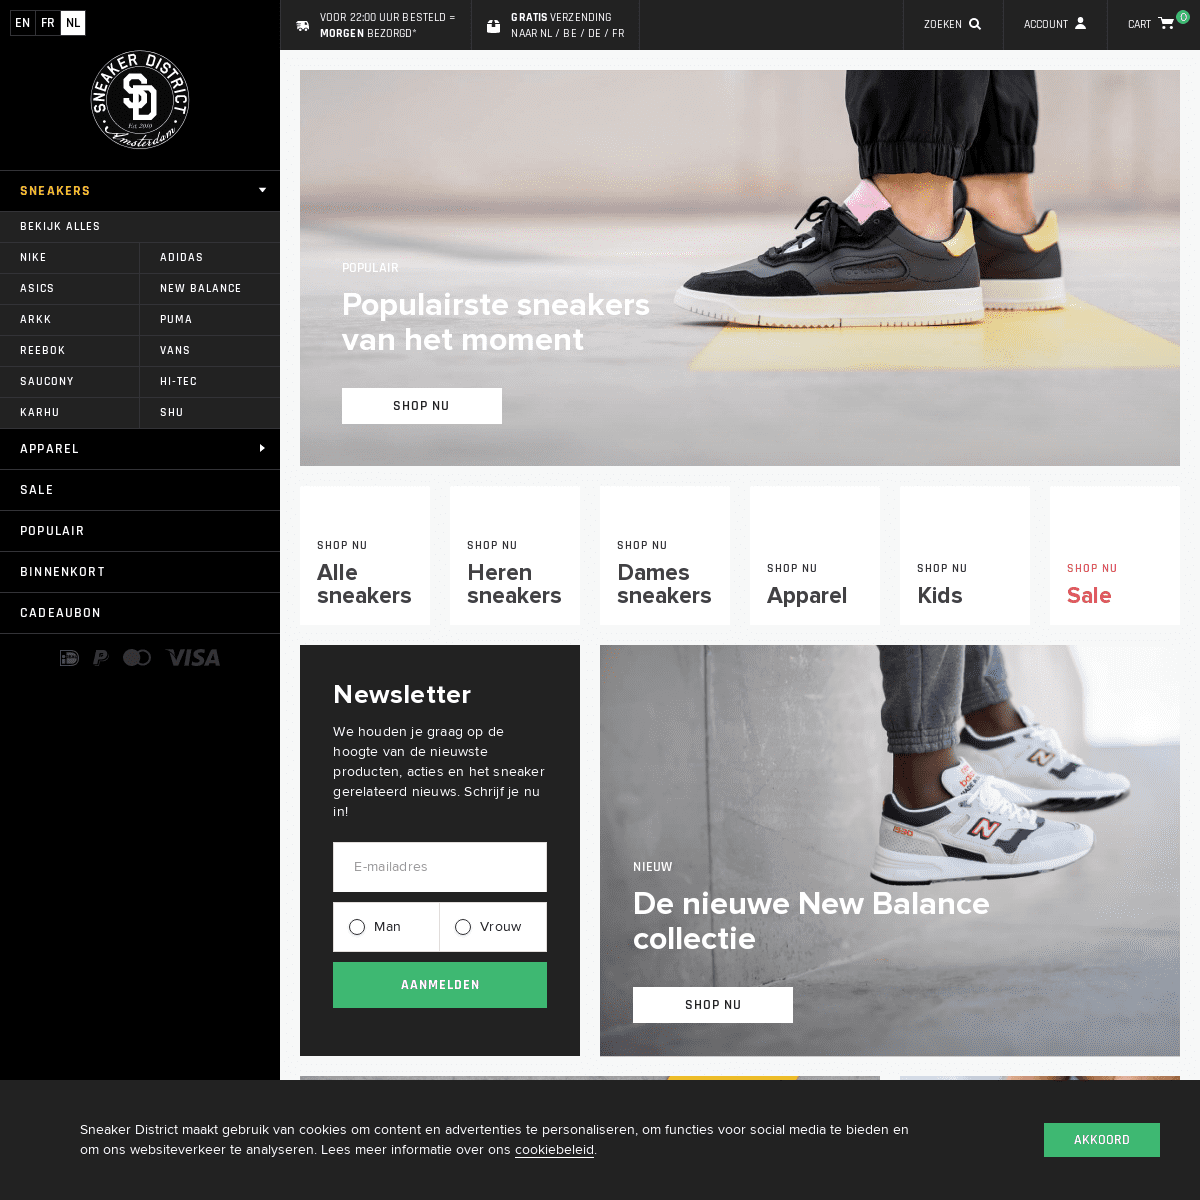 A complete backup of sneakerdistrict.nl